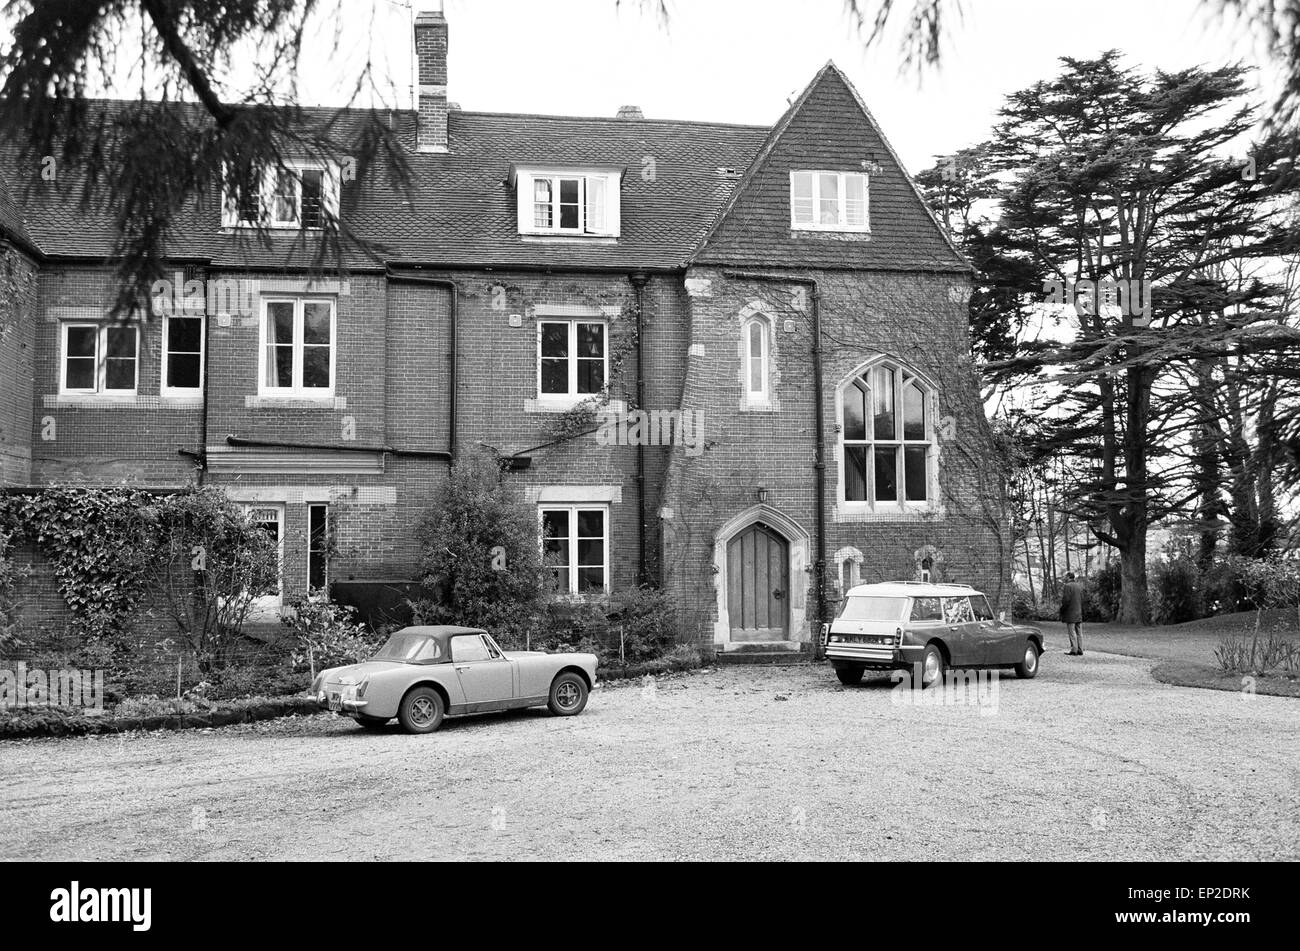 Grants Hill House Uckfield Sussex home of Ian and Susan Maxwell-Scott friends of Lord Lucan 12th November 1974. Susan Maxwell-Scott last saw Lord Lucan about 11.30 on the night of the murder of Sandra Rivett his children's nanny. Richard John Bingham 7th Earl of Lucan popularly known as Lord Lucan was British peer who disappeared in the early hours of 8 November 1974 following the murder of Sandra Rivett his children's nanny the previous evening. There has been no verified sighting of him since then. On 19th June 1975 an inquest jury named Lucan as the murderer of Sandra Rivett. Stock Photo